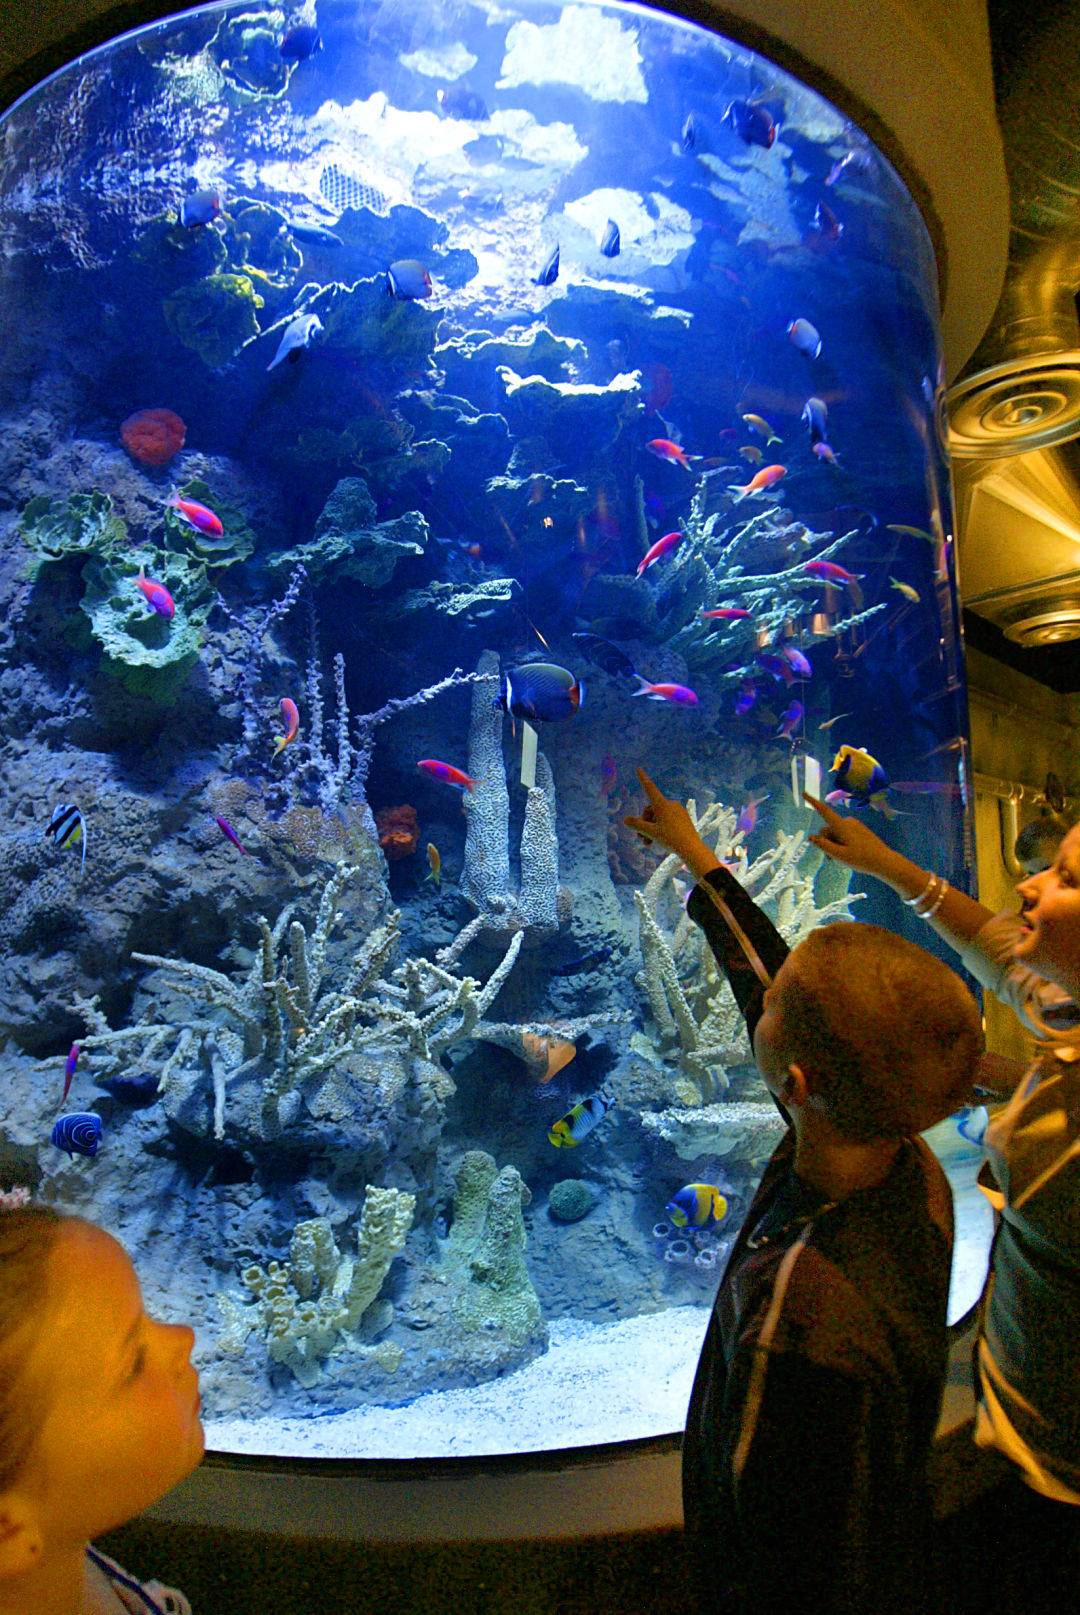 The Houston aquarium has more than 300 species of life from around